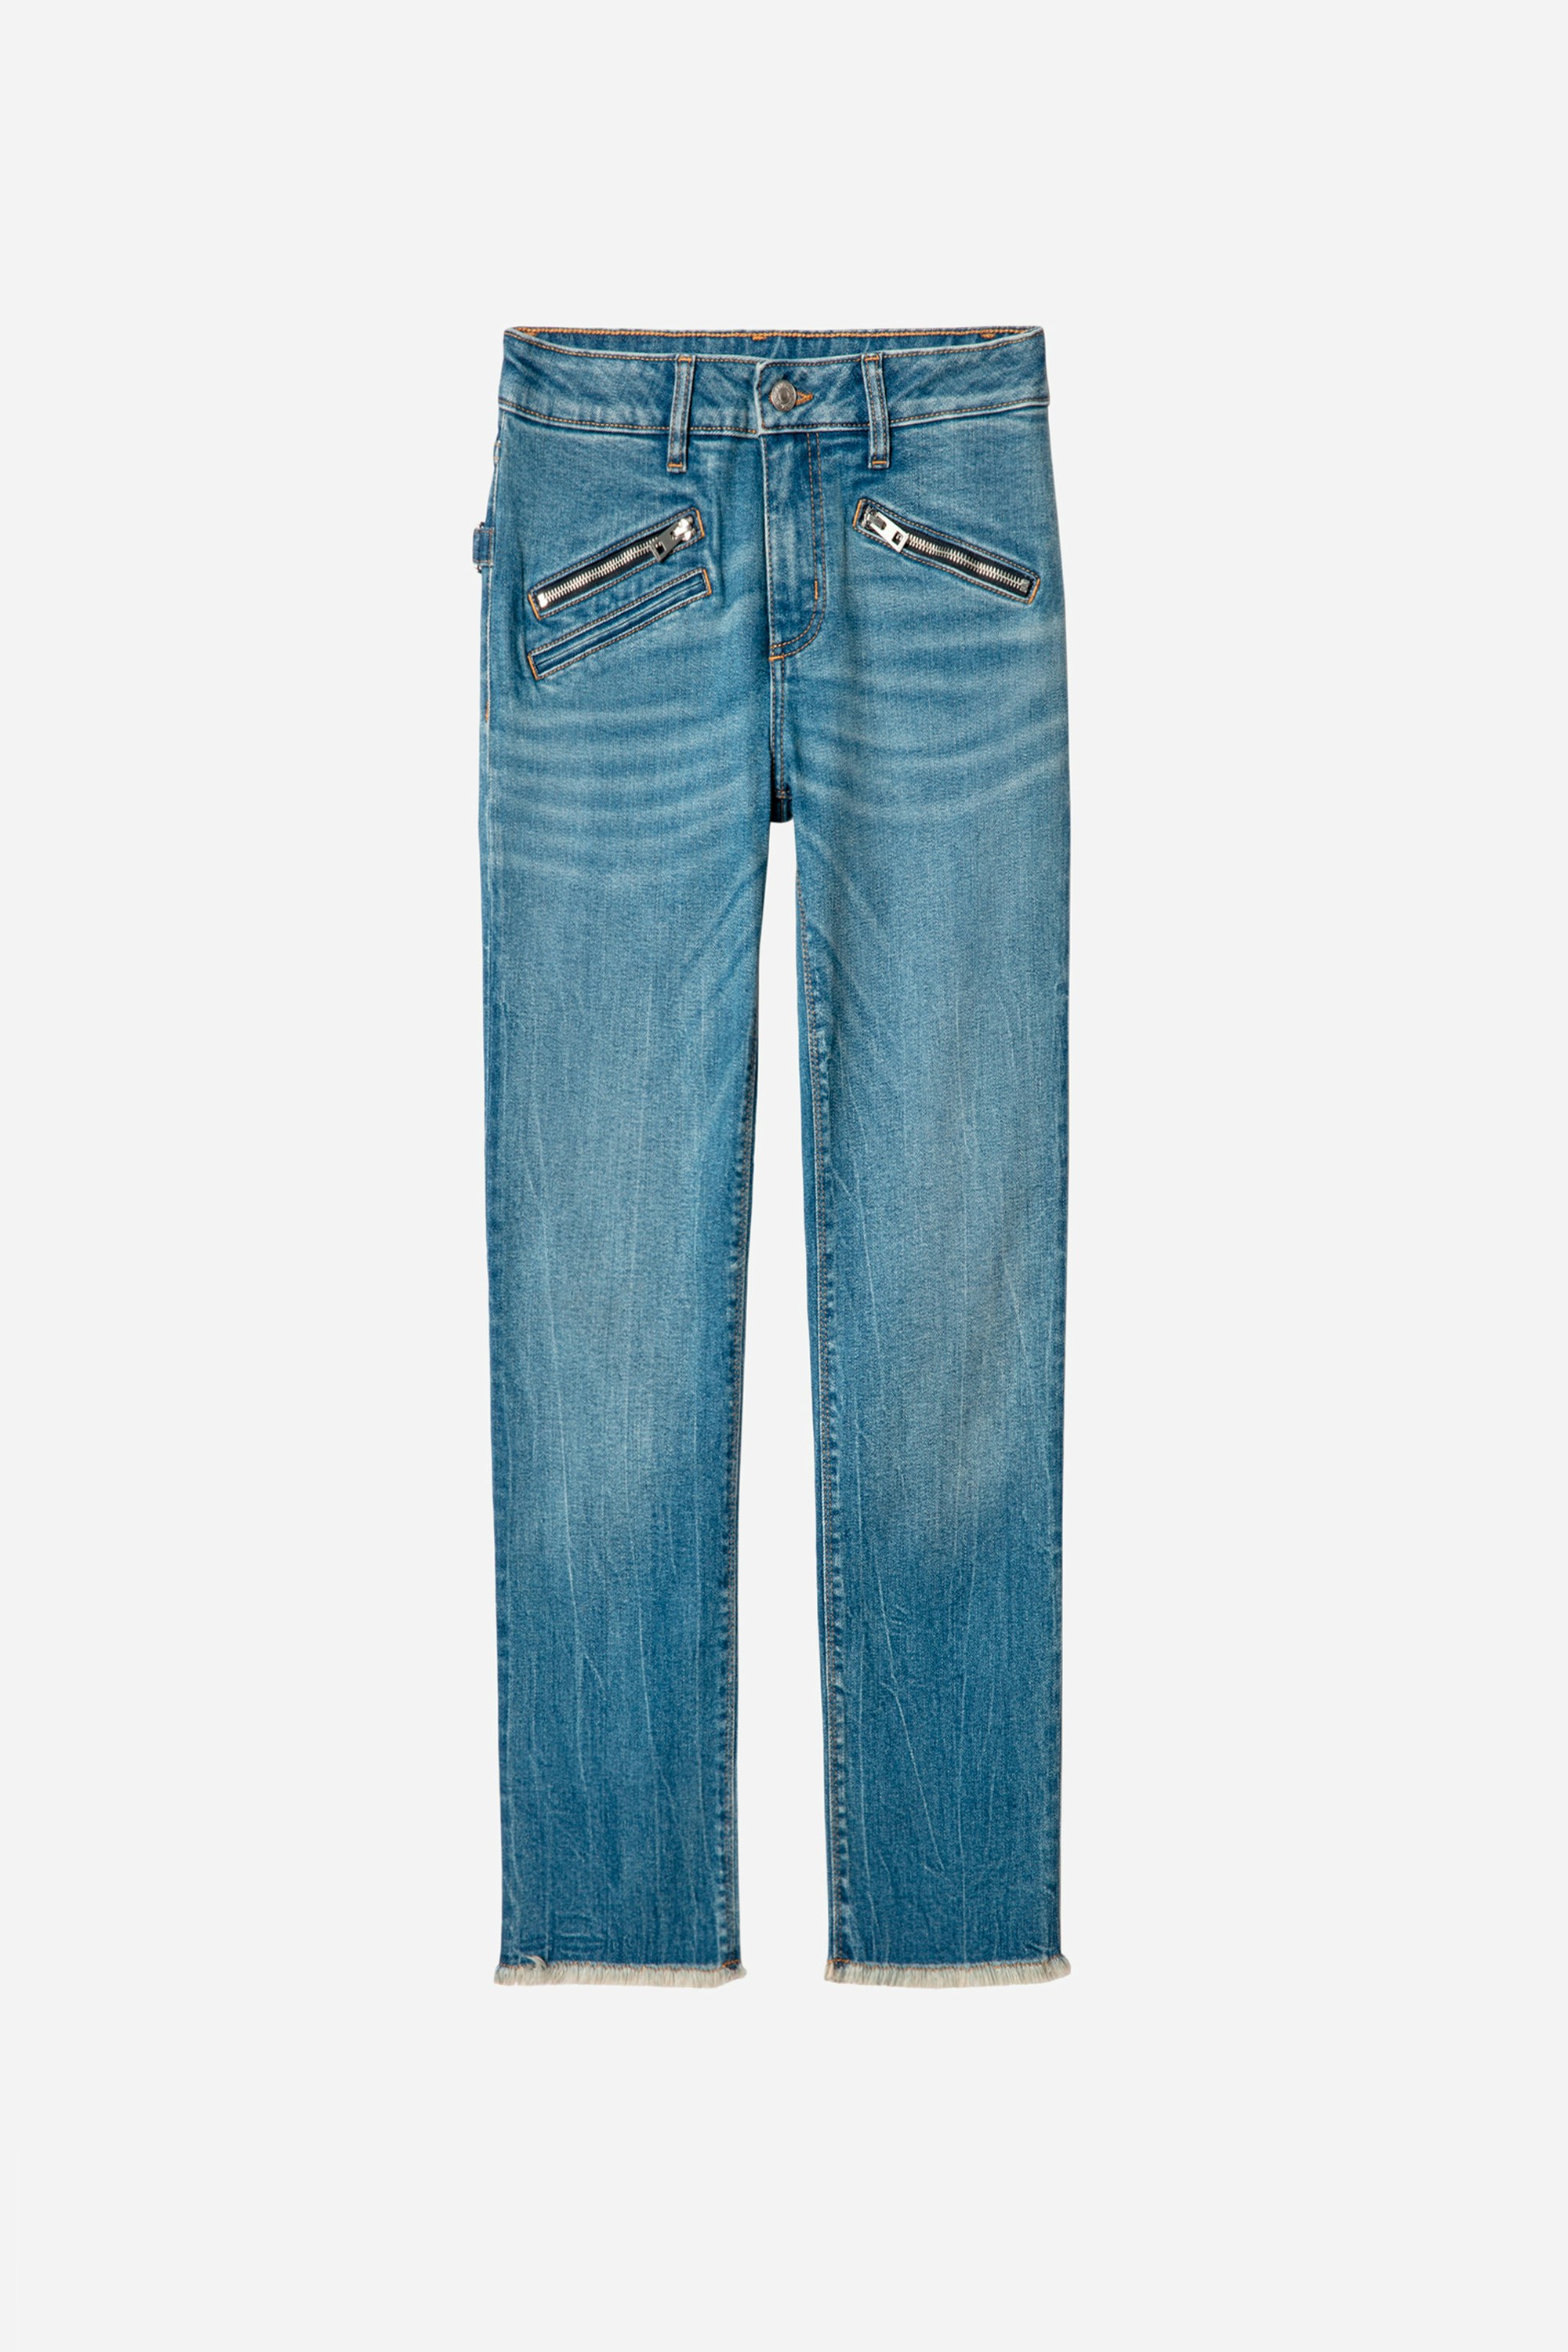 Ava Jeans - Women's blue washed slim jeans.